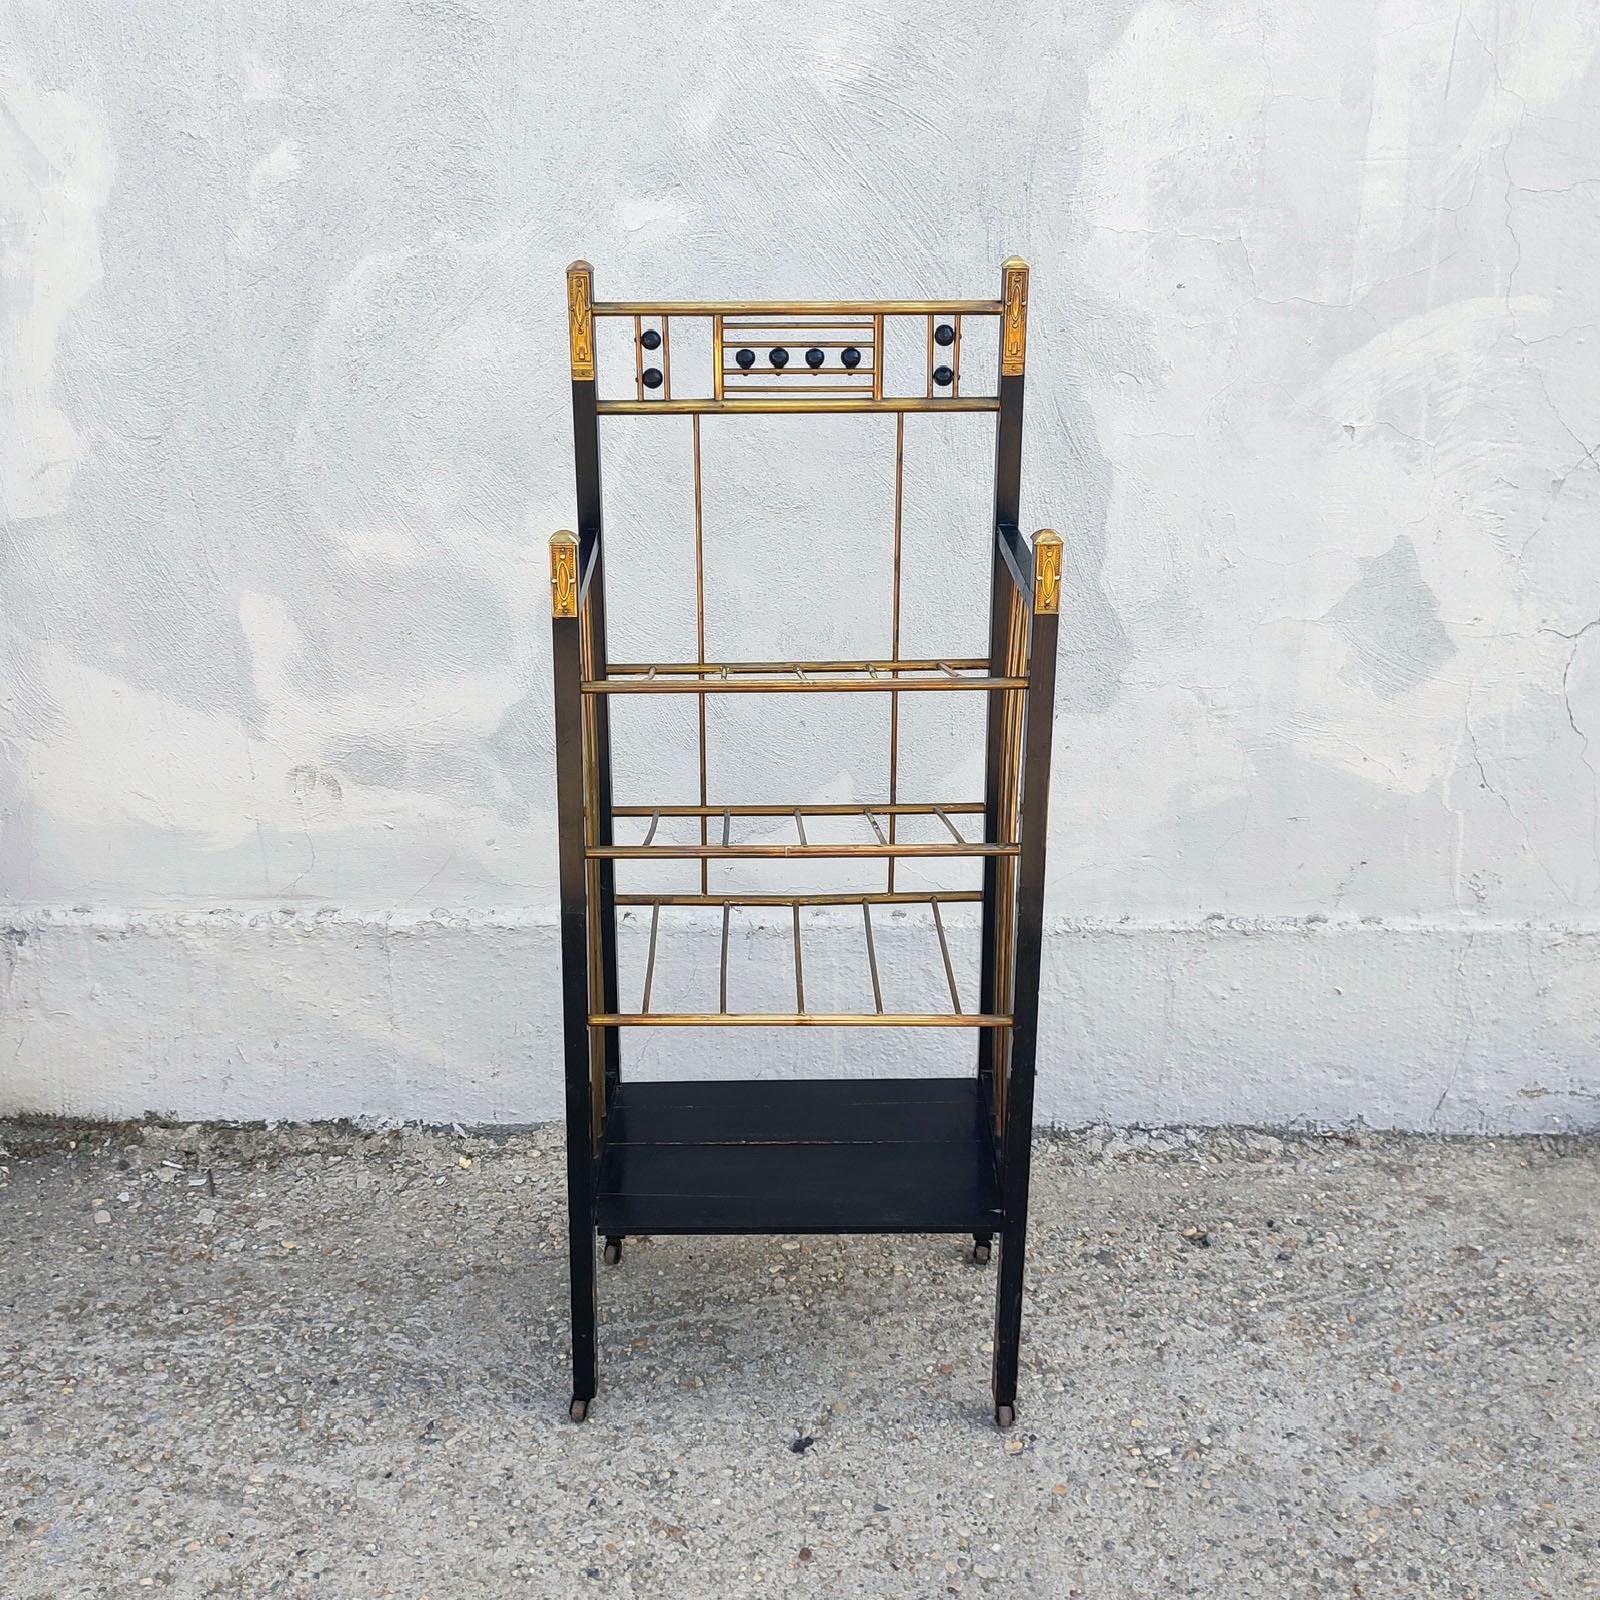 Vienna Secession Viennese Secession Stand or Etagere in the Style of Koloman Moser, circa 1900 For Sale